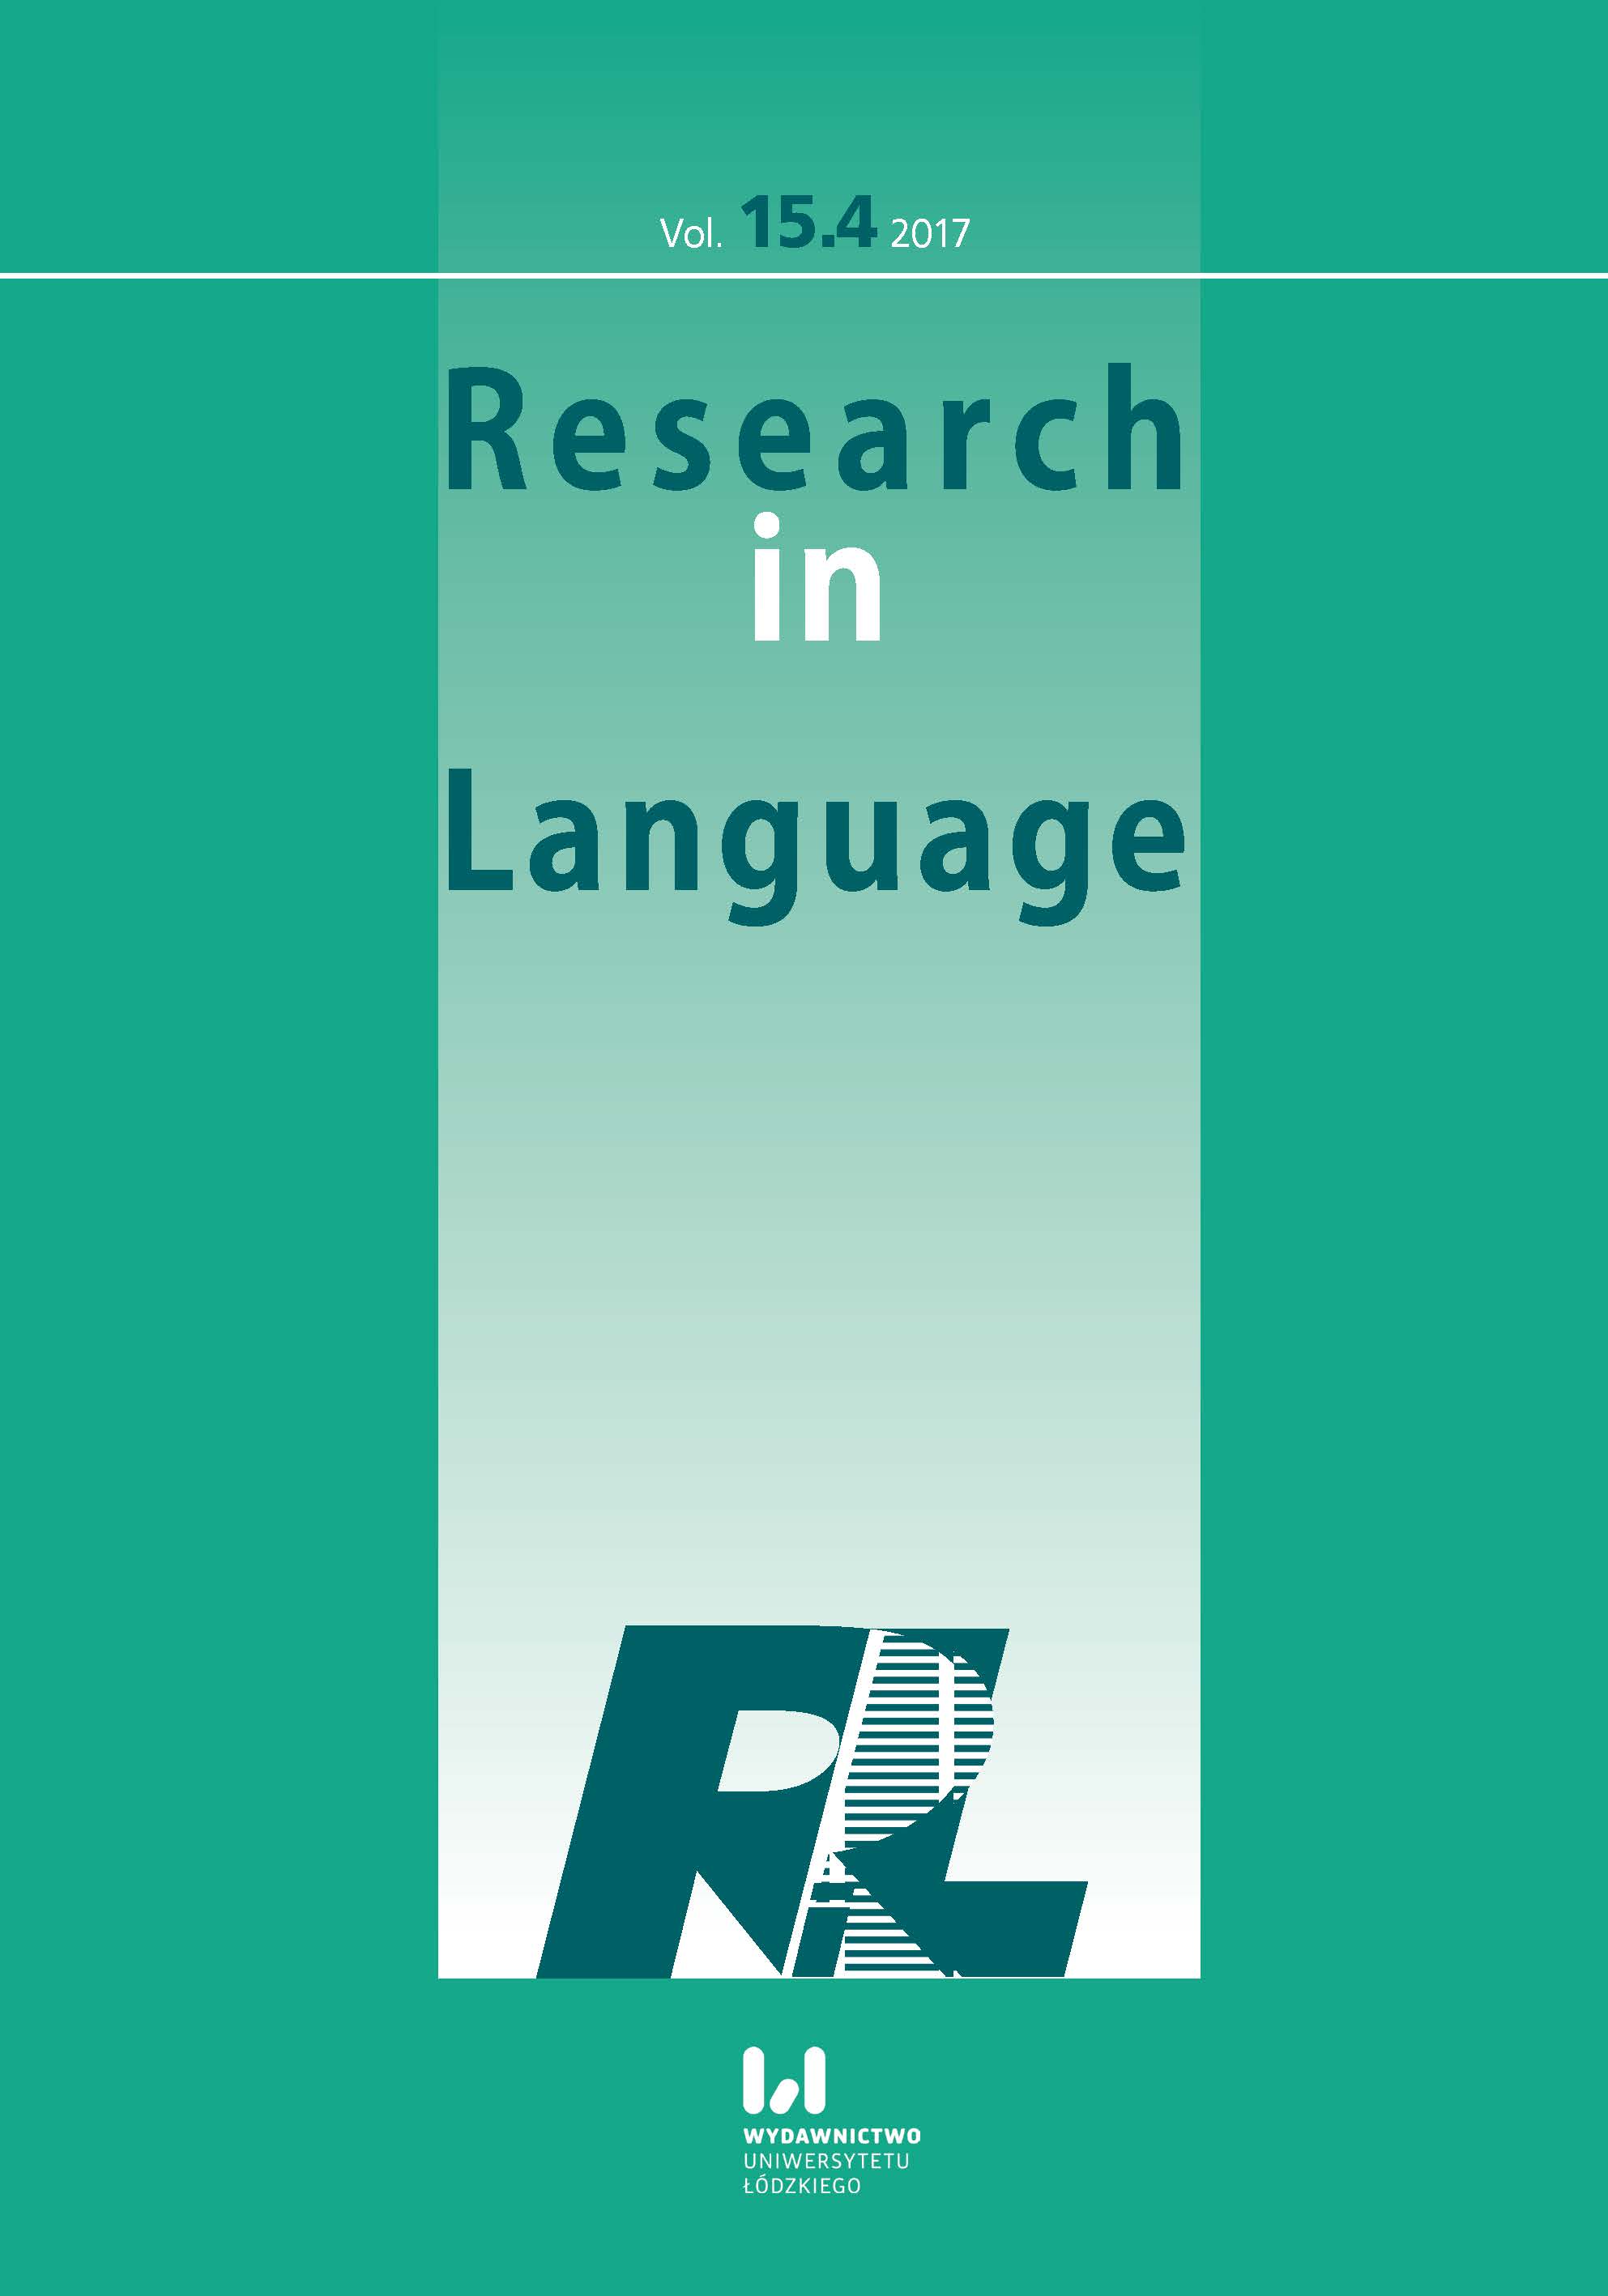 Research in Language (RiL)